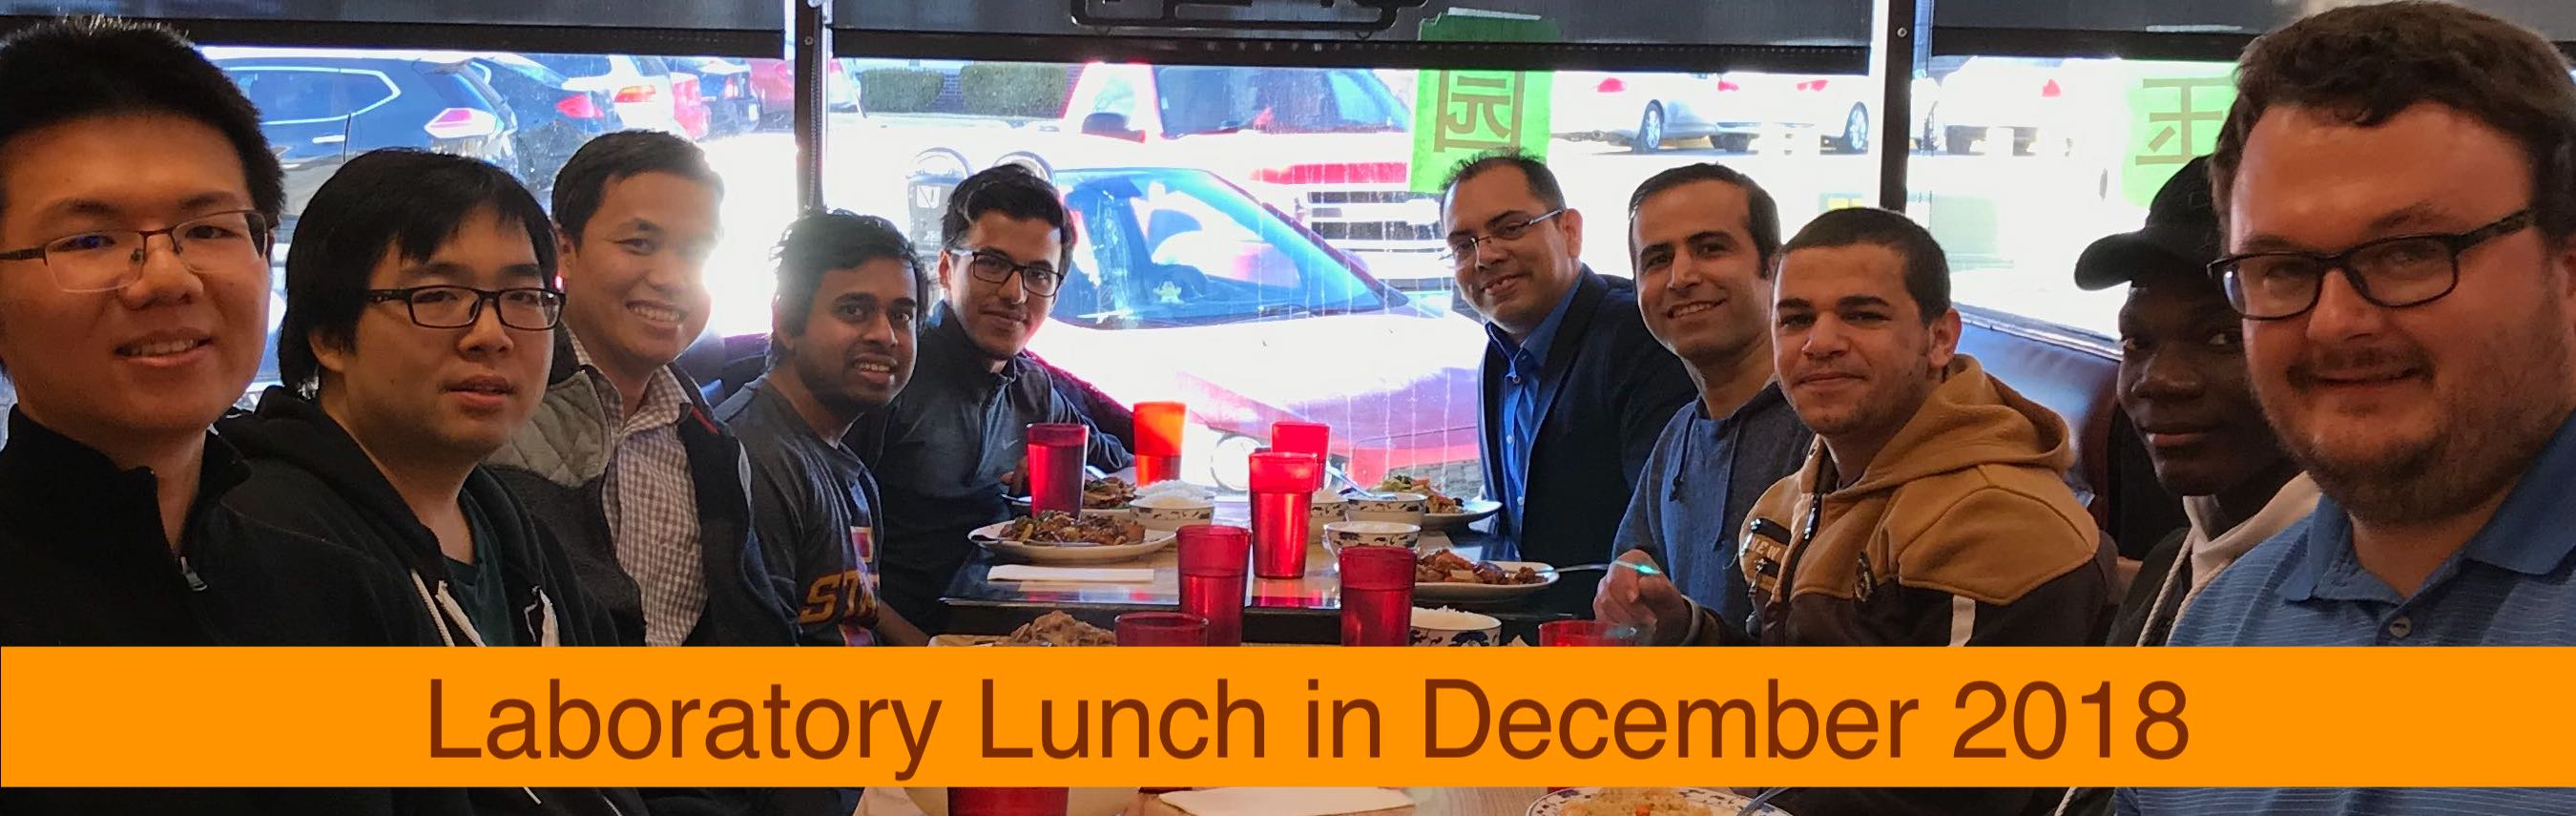 End of the year lunch, December 2018